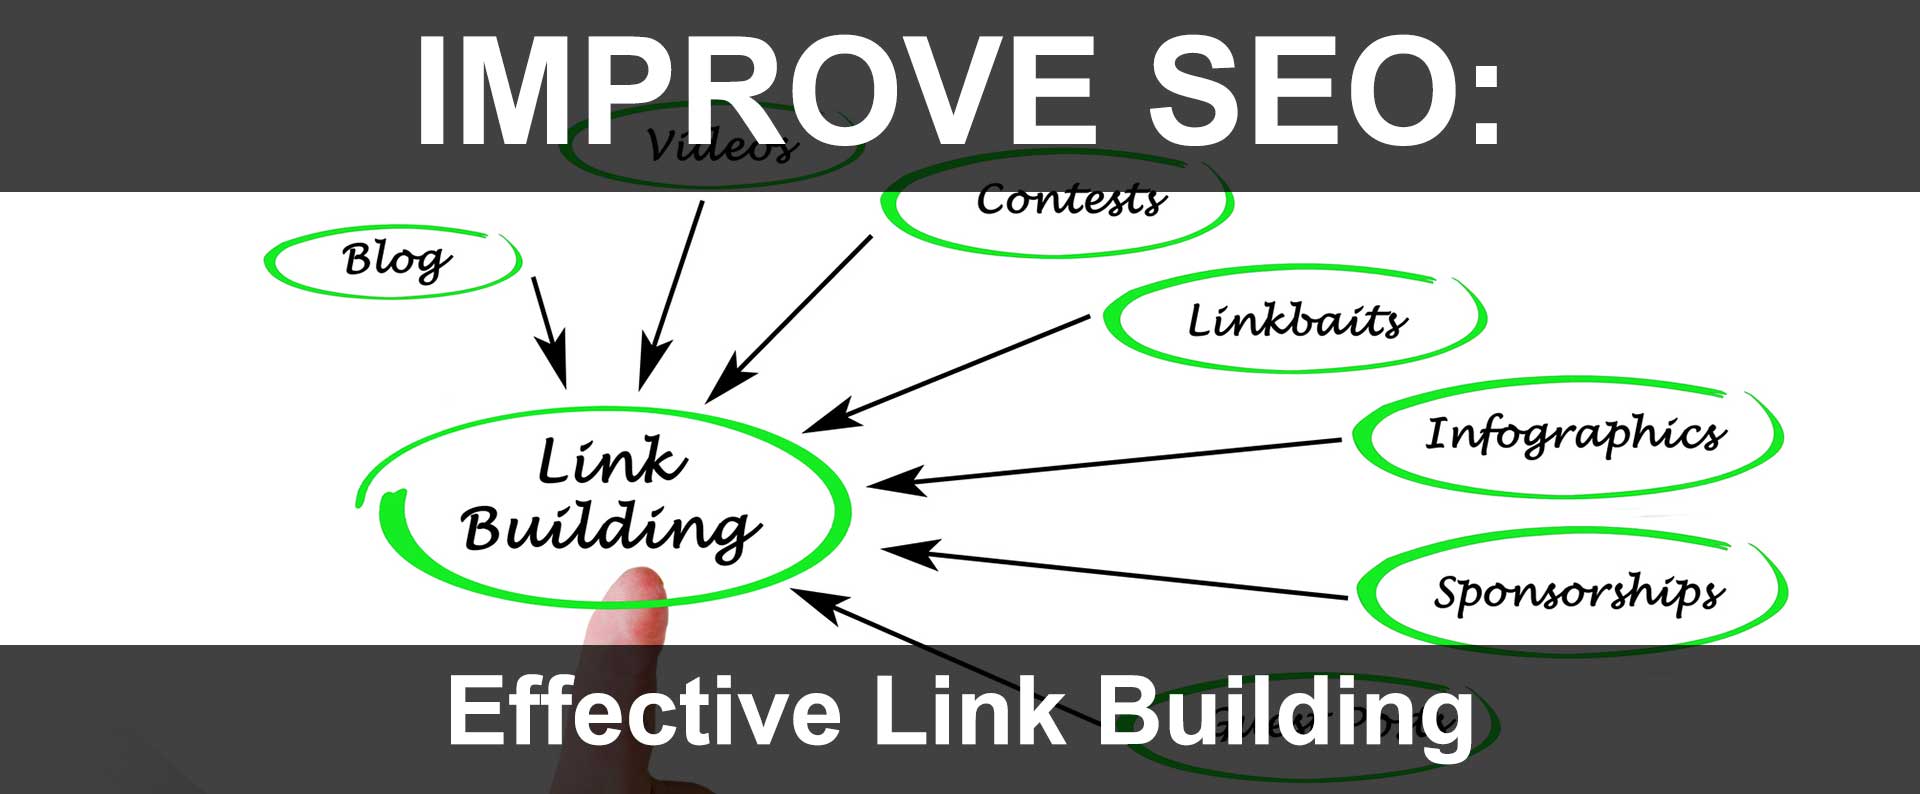 Tips on Using Incoming & Outgoing Links Effectively